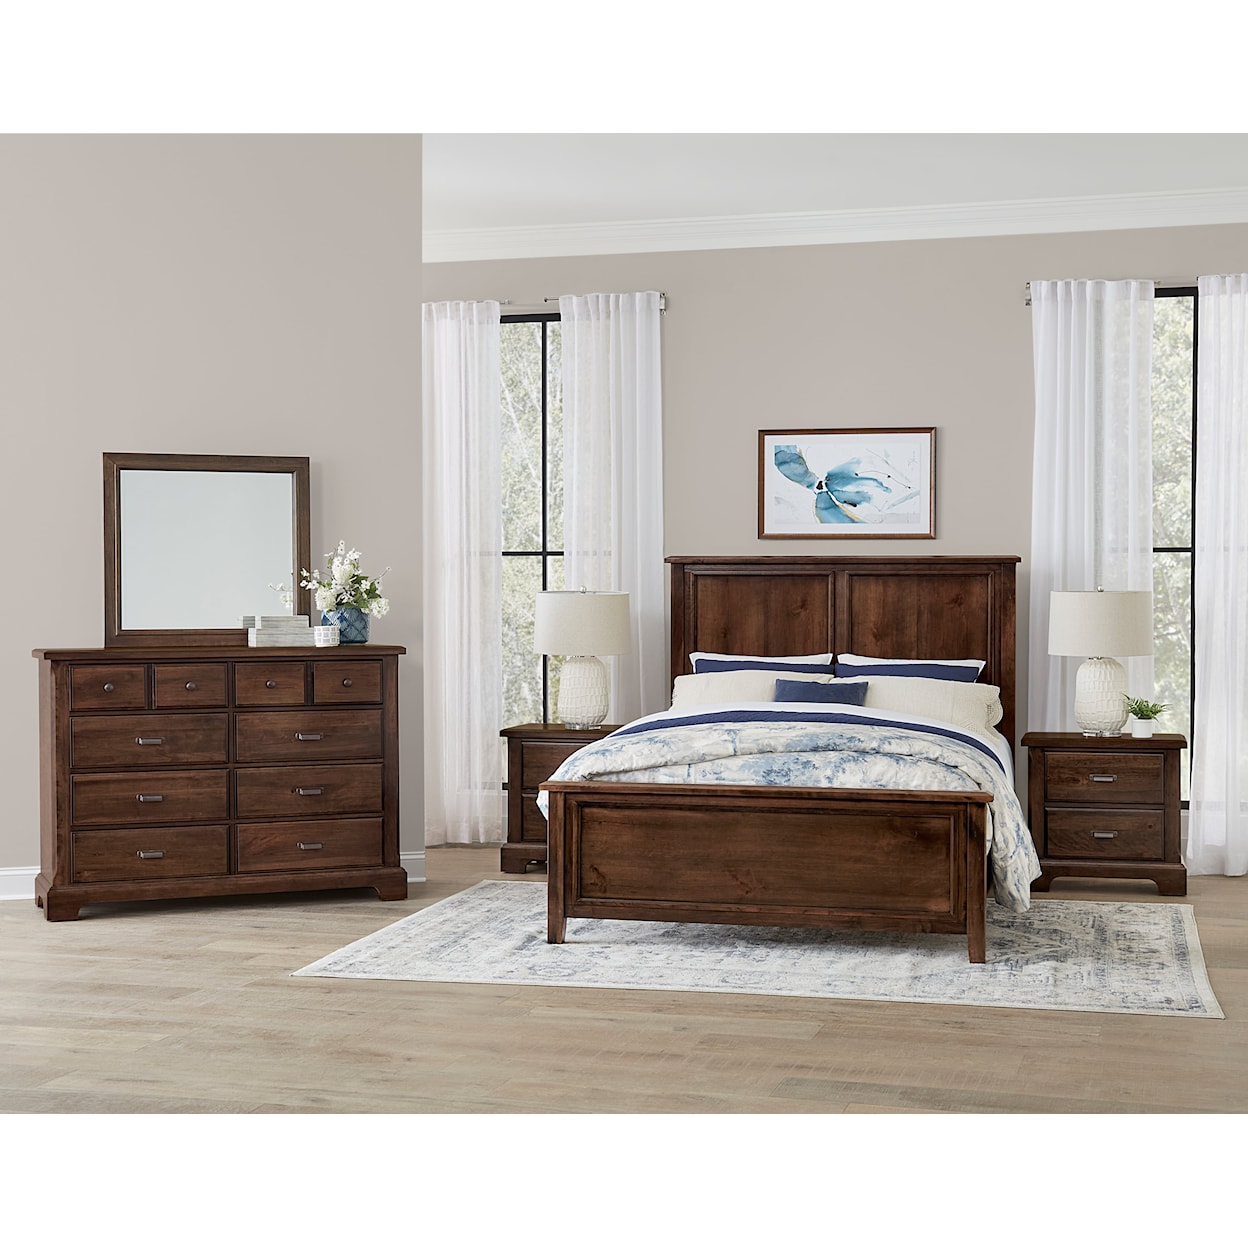 Vaughan Bassett Lancaster County King Amish Panel Bed